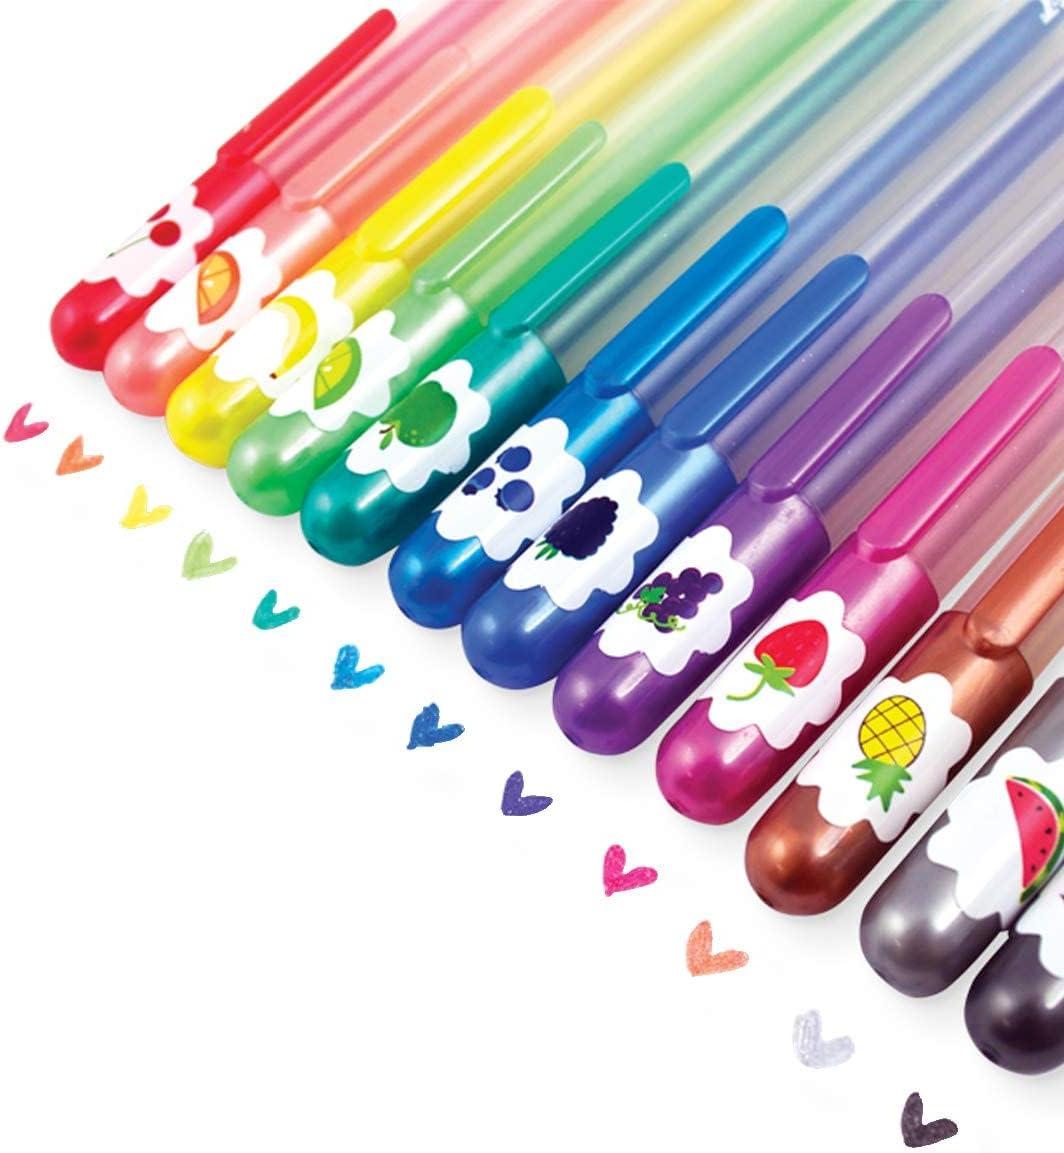 Ooly Yummy Yummy Scented Glitter Gel Pens, Set of 12